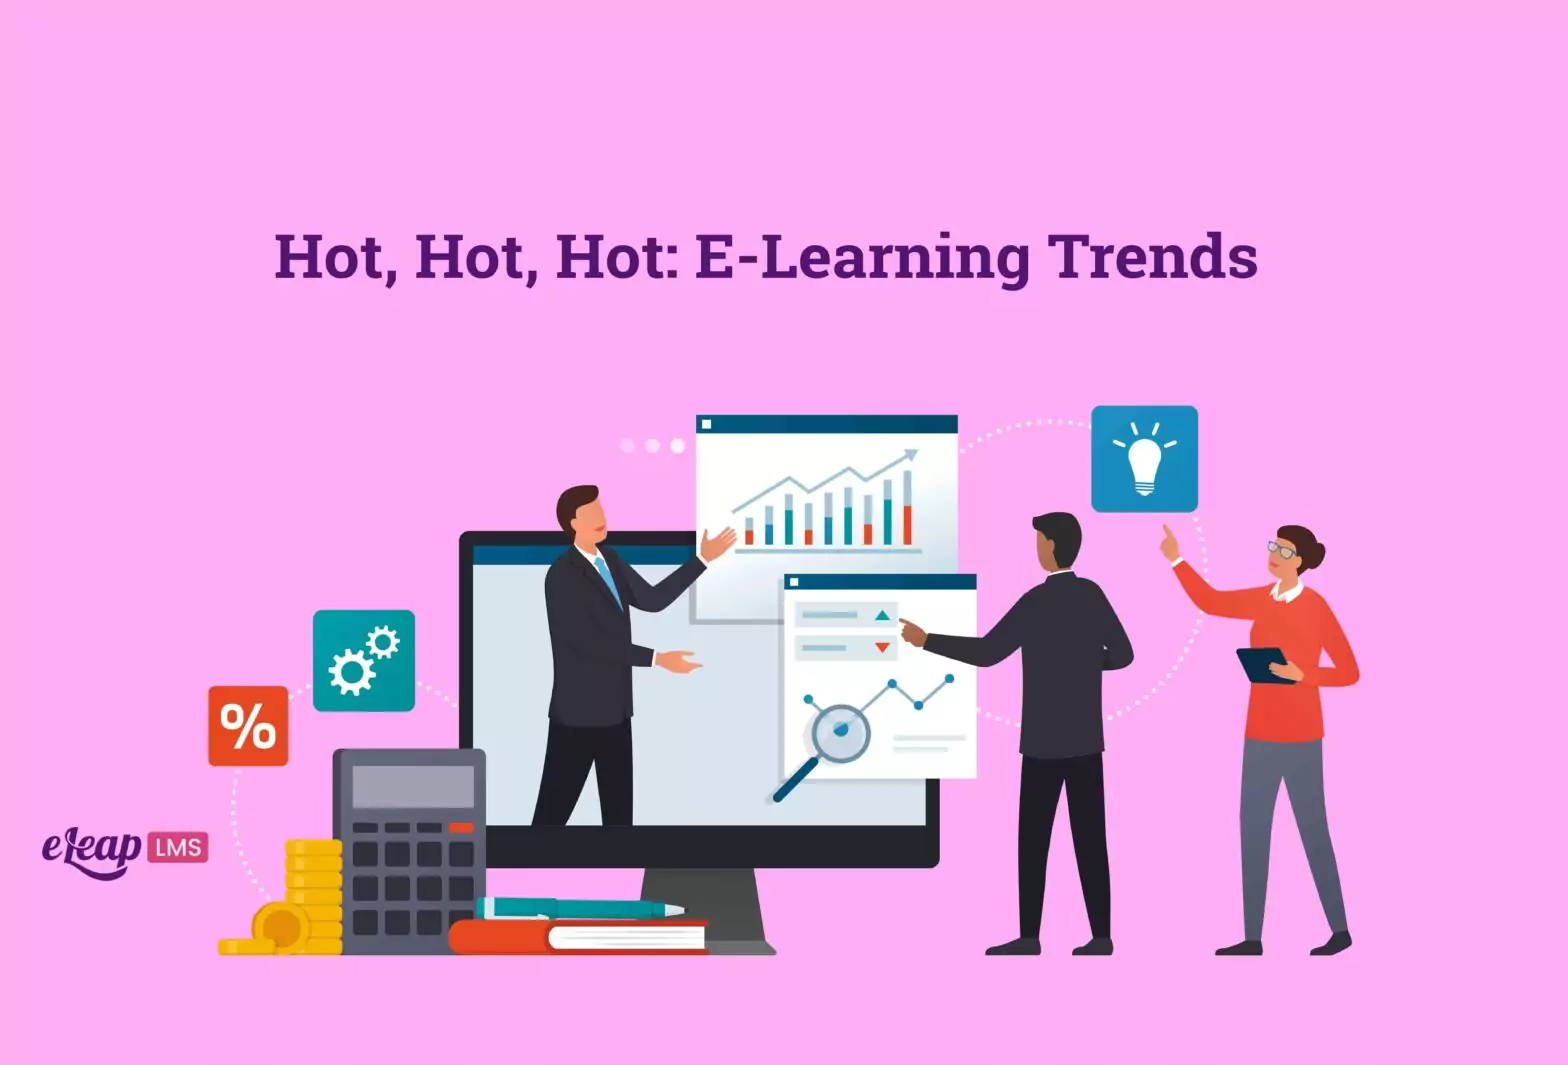 Hot, Hot, Hot: E-Learning Trends